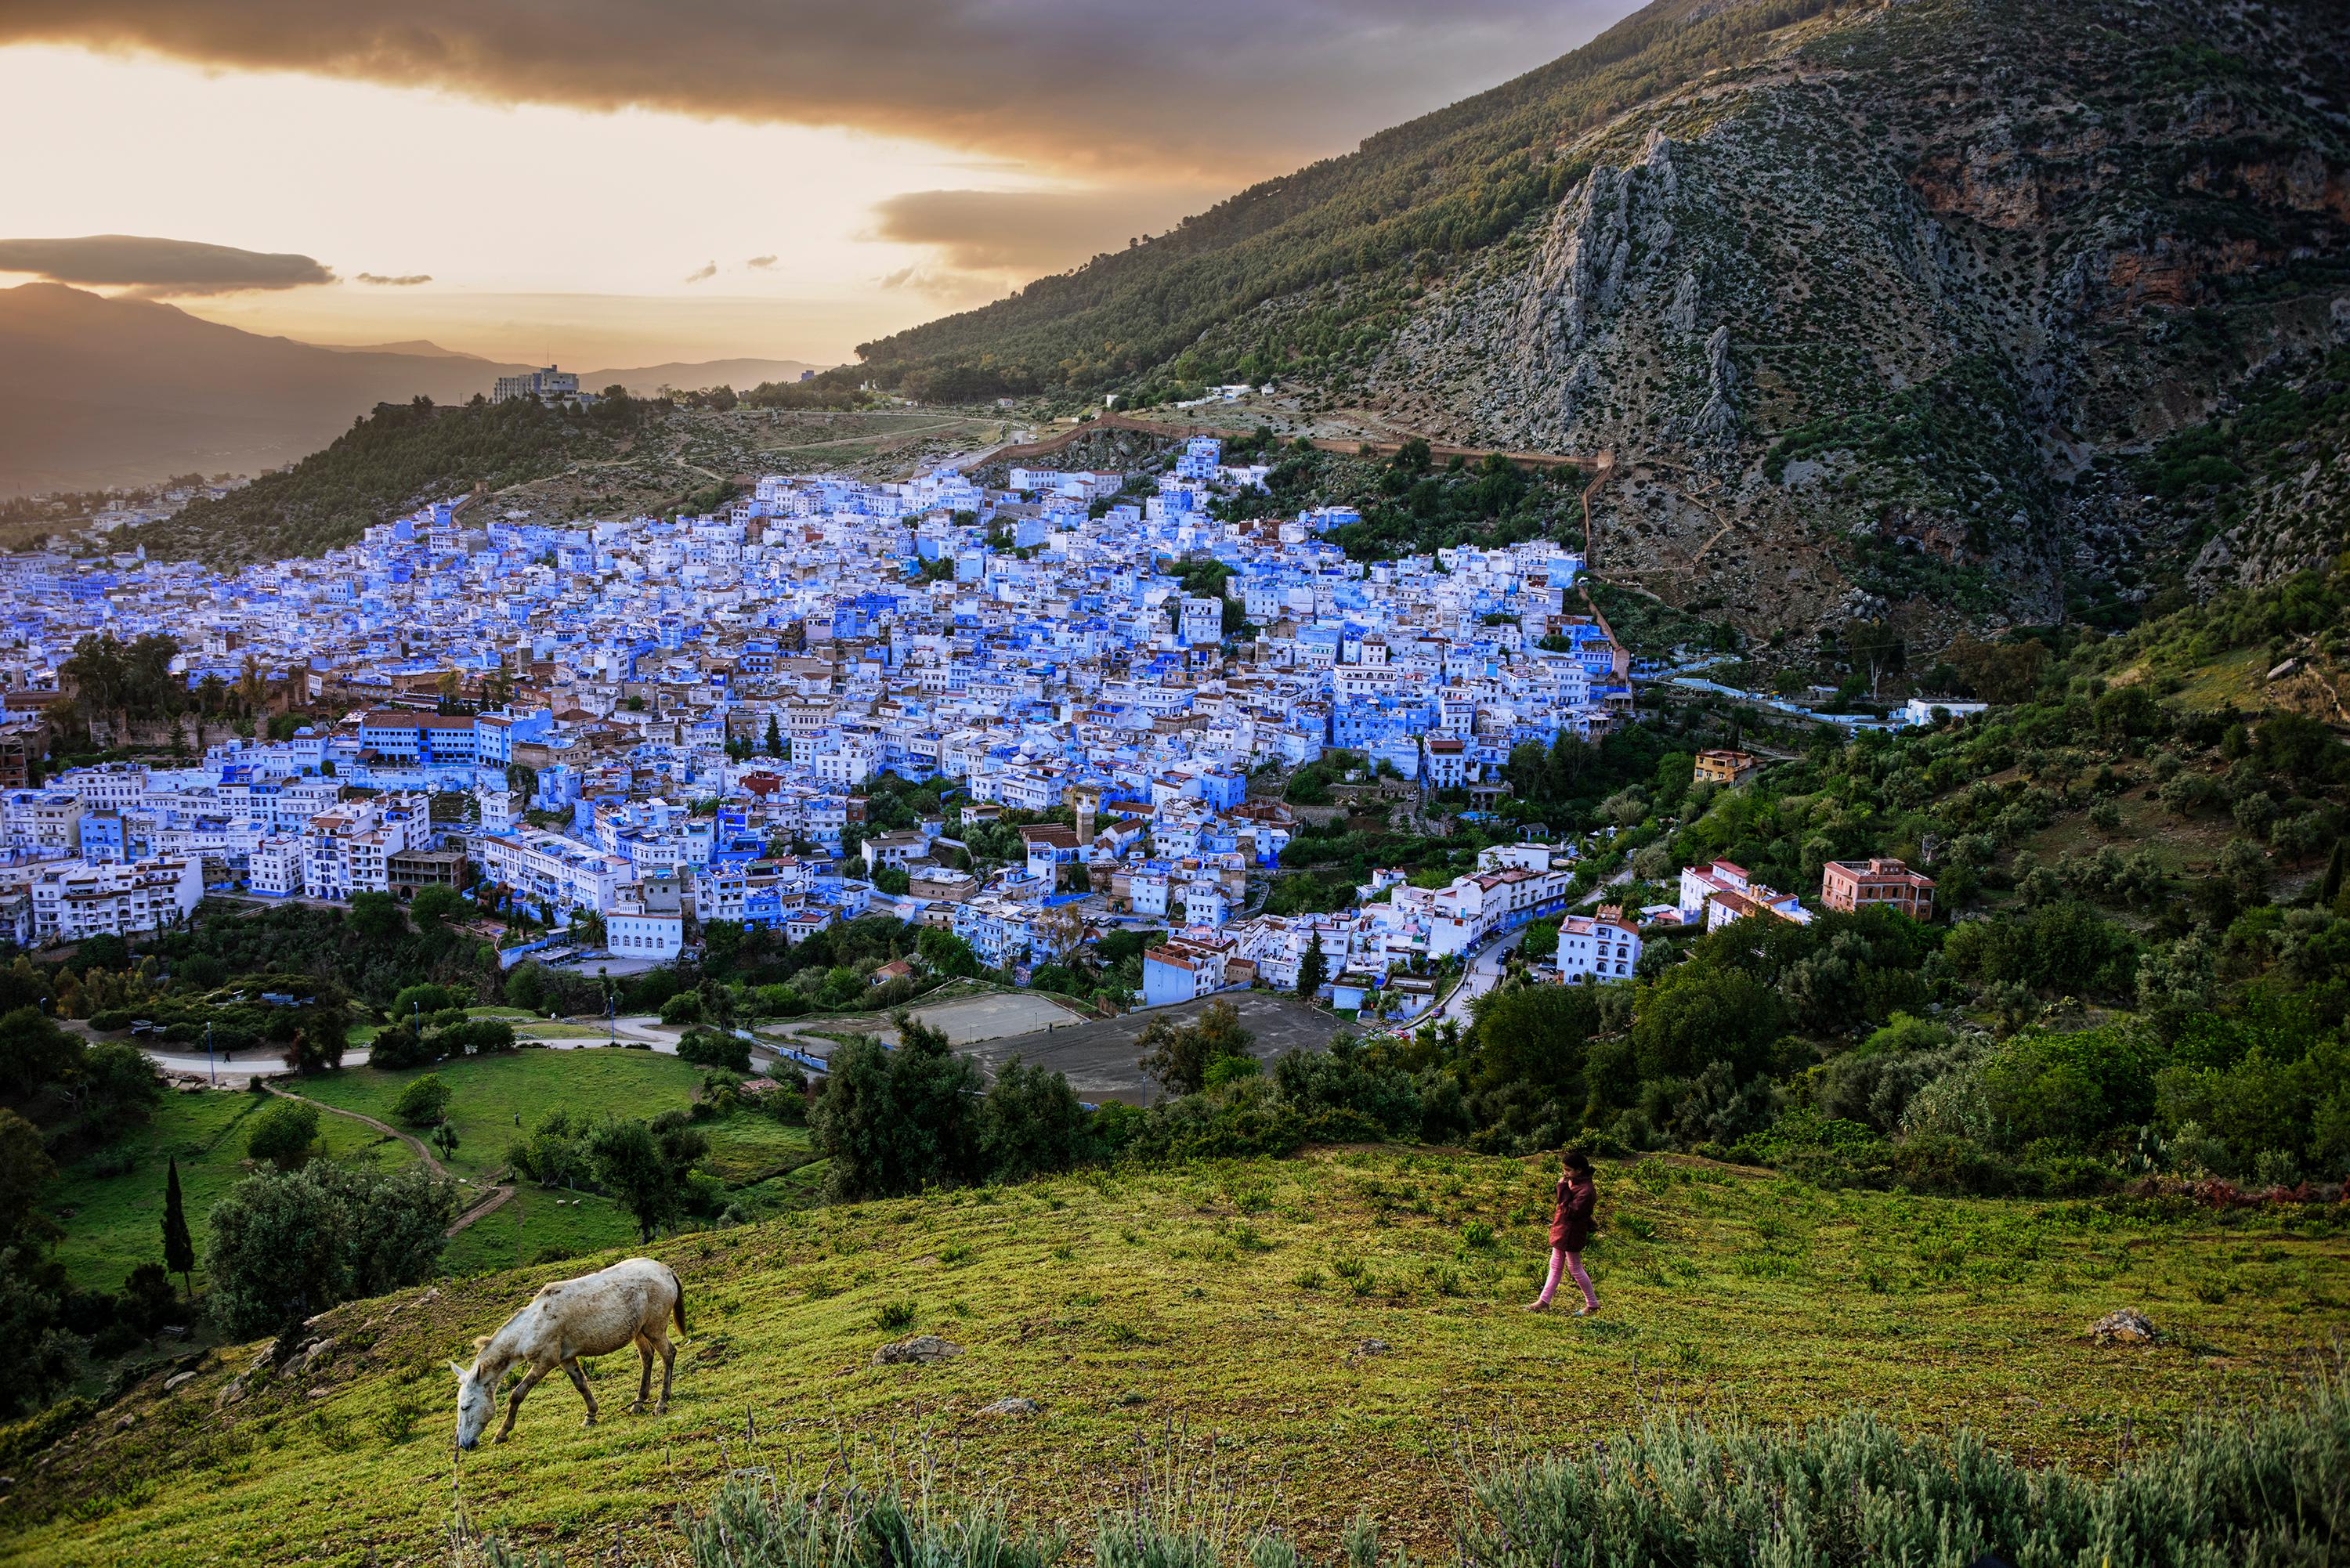 Hilltop View of Chefchaouen - Photograph by Steve McCurry